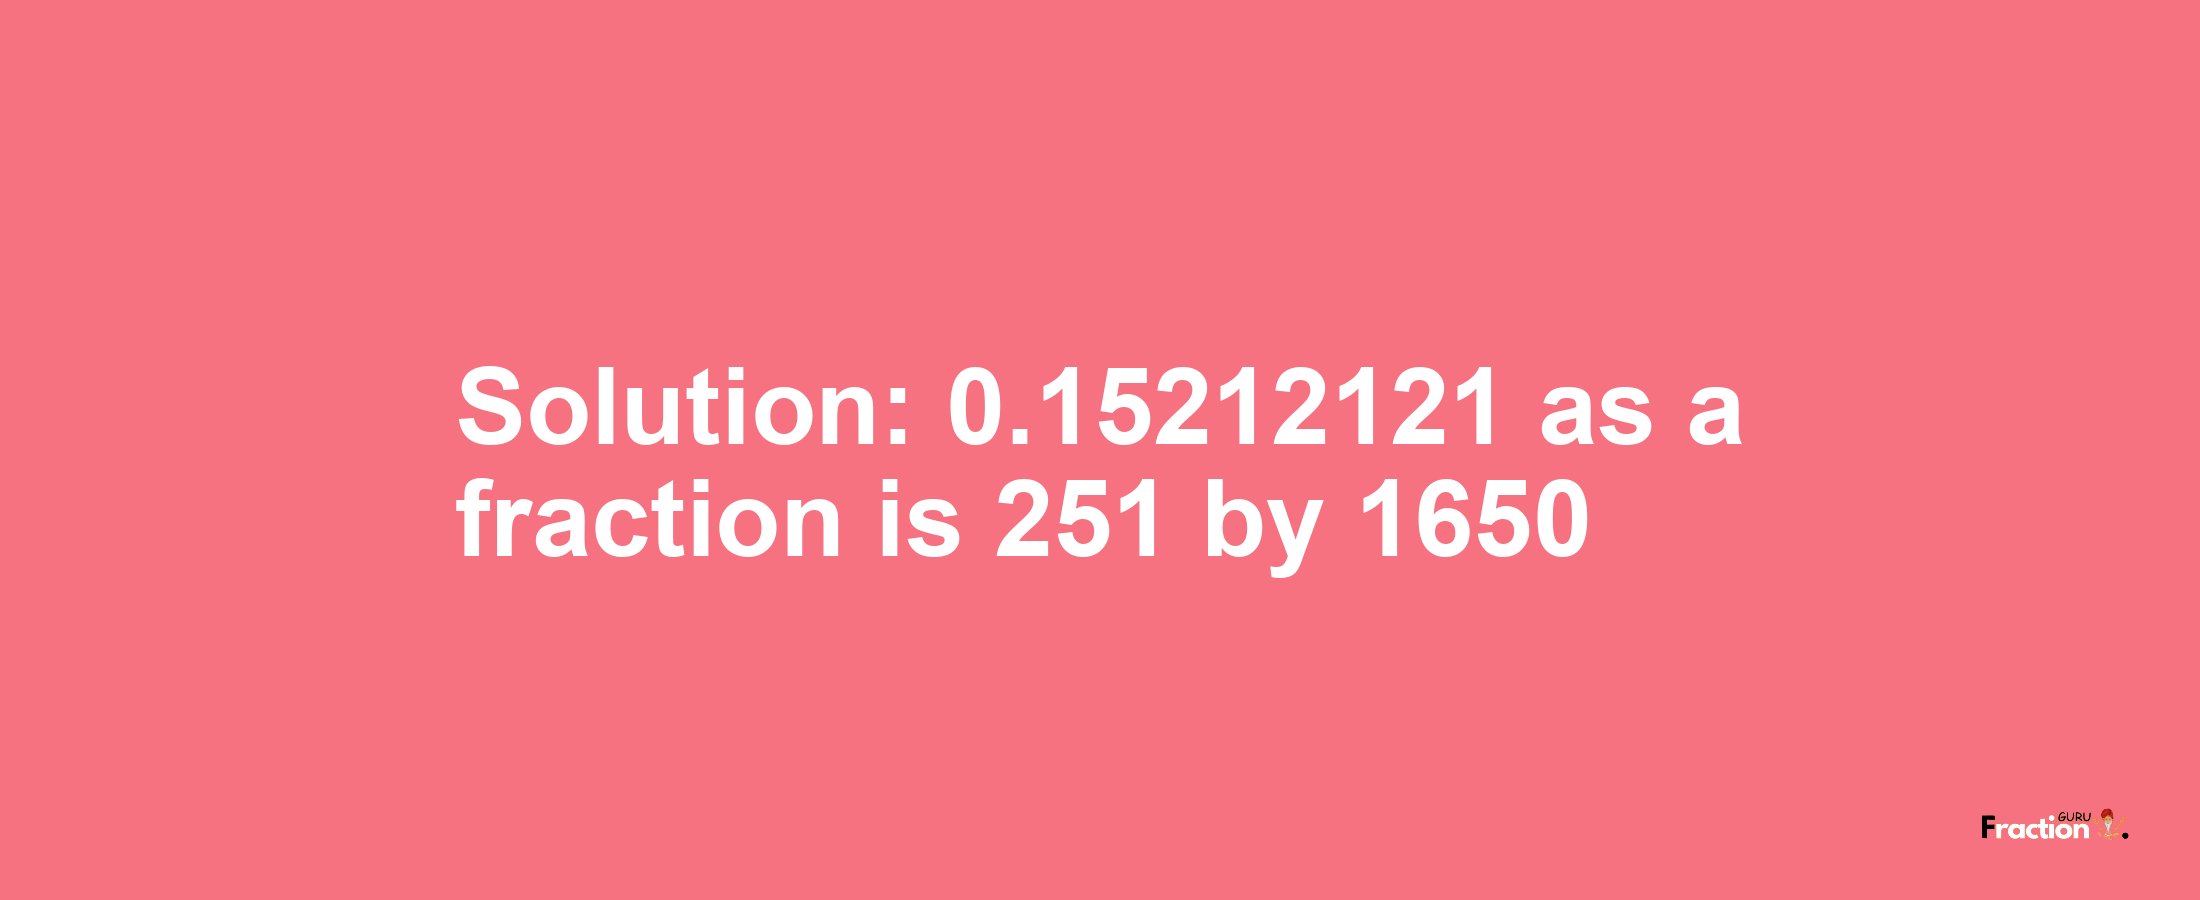 Solution:0.15212121 as a fraction is 251/1650